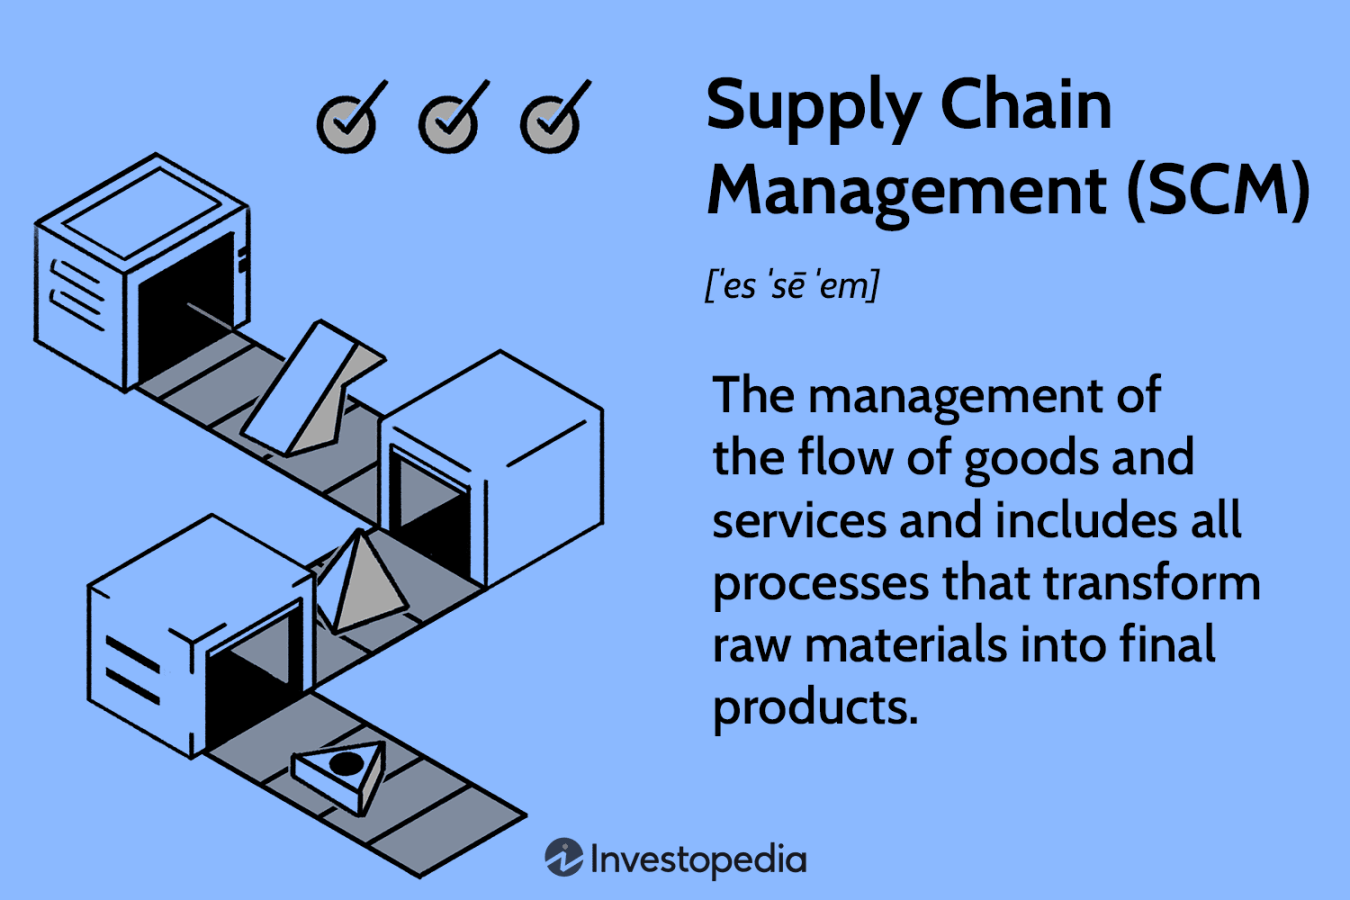 Supply Chain Management (SCM): How It Works and Why It Is Important